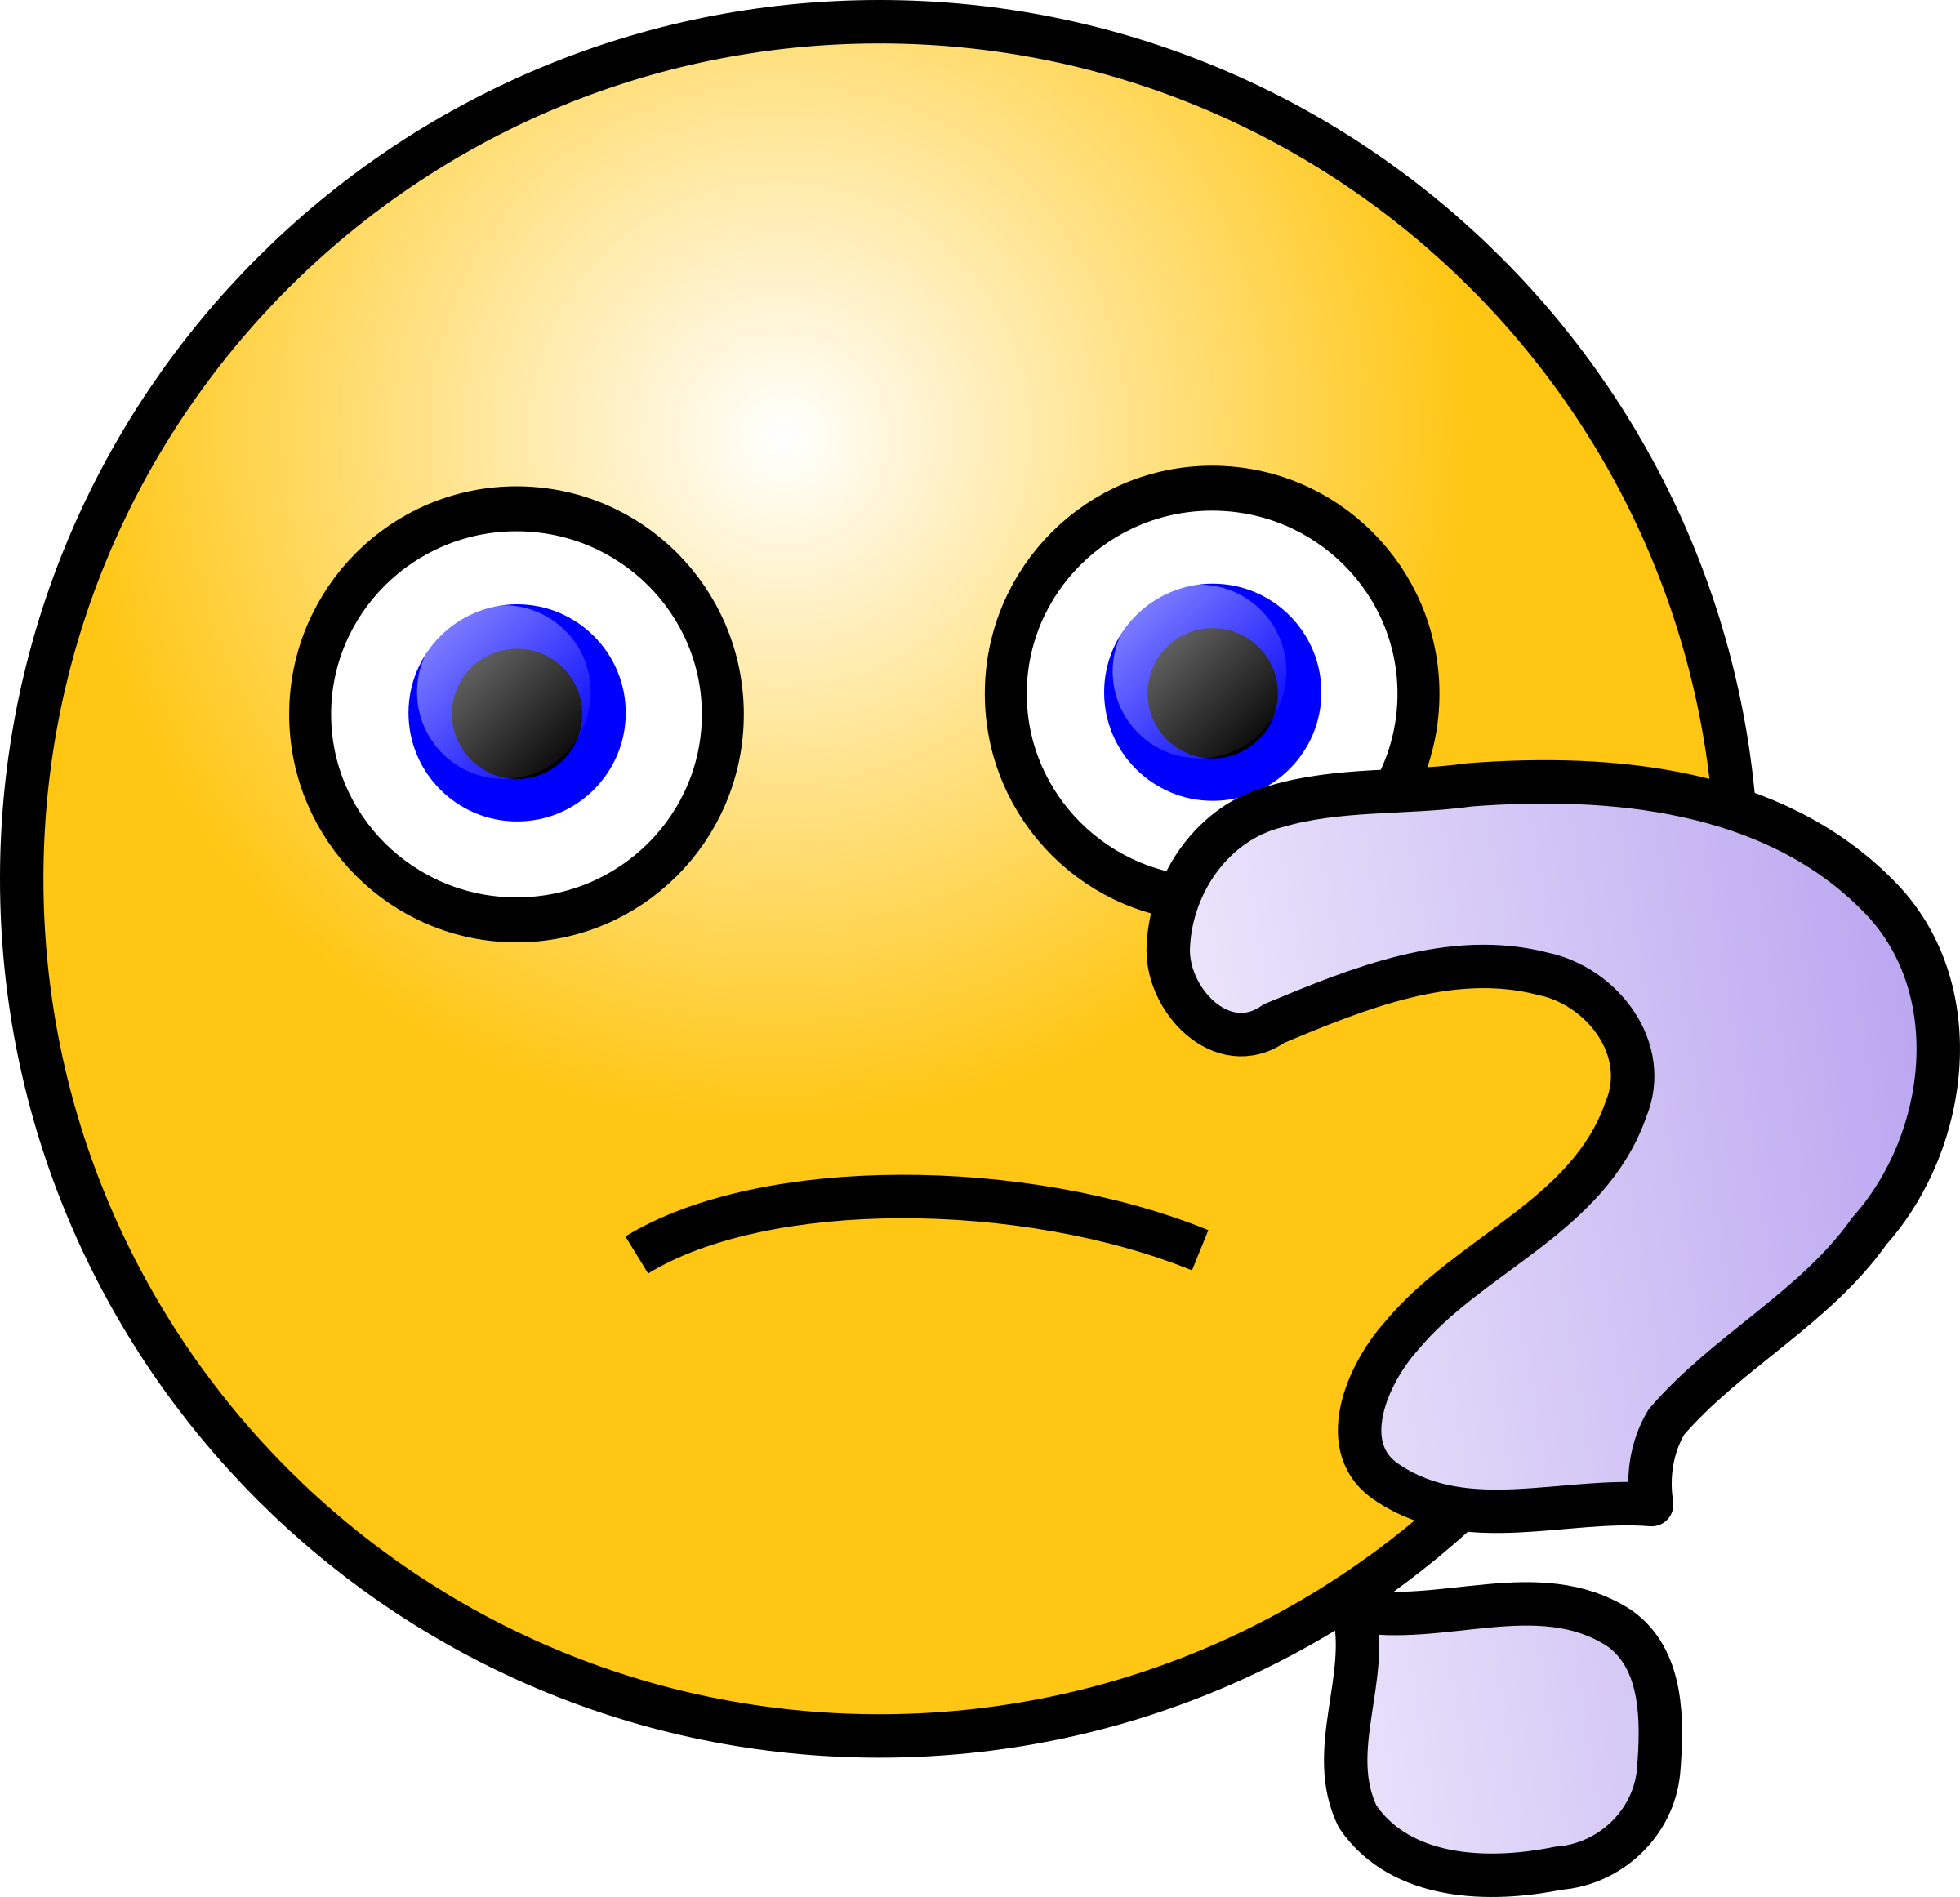 Worry clipart emotional distress. Worried emoticon group emotions